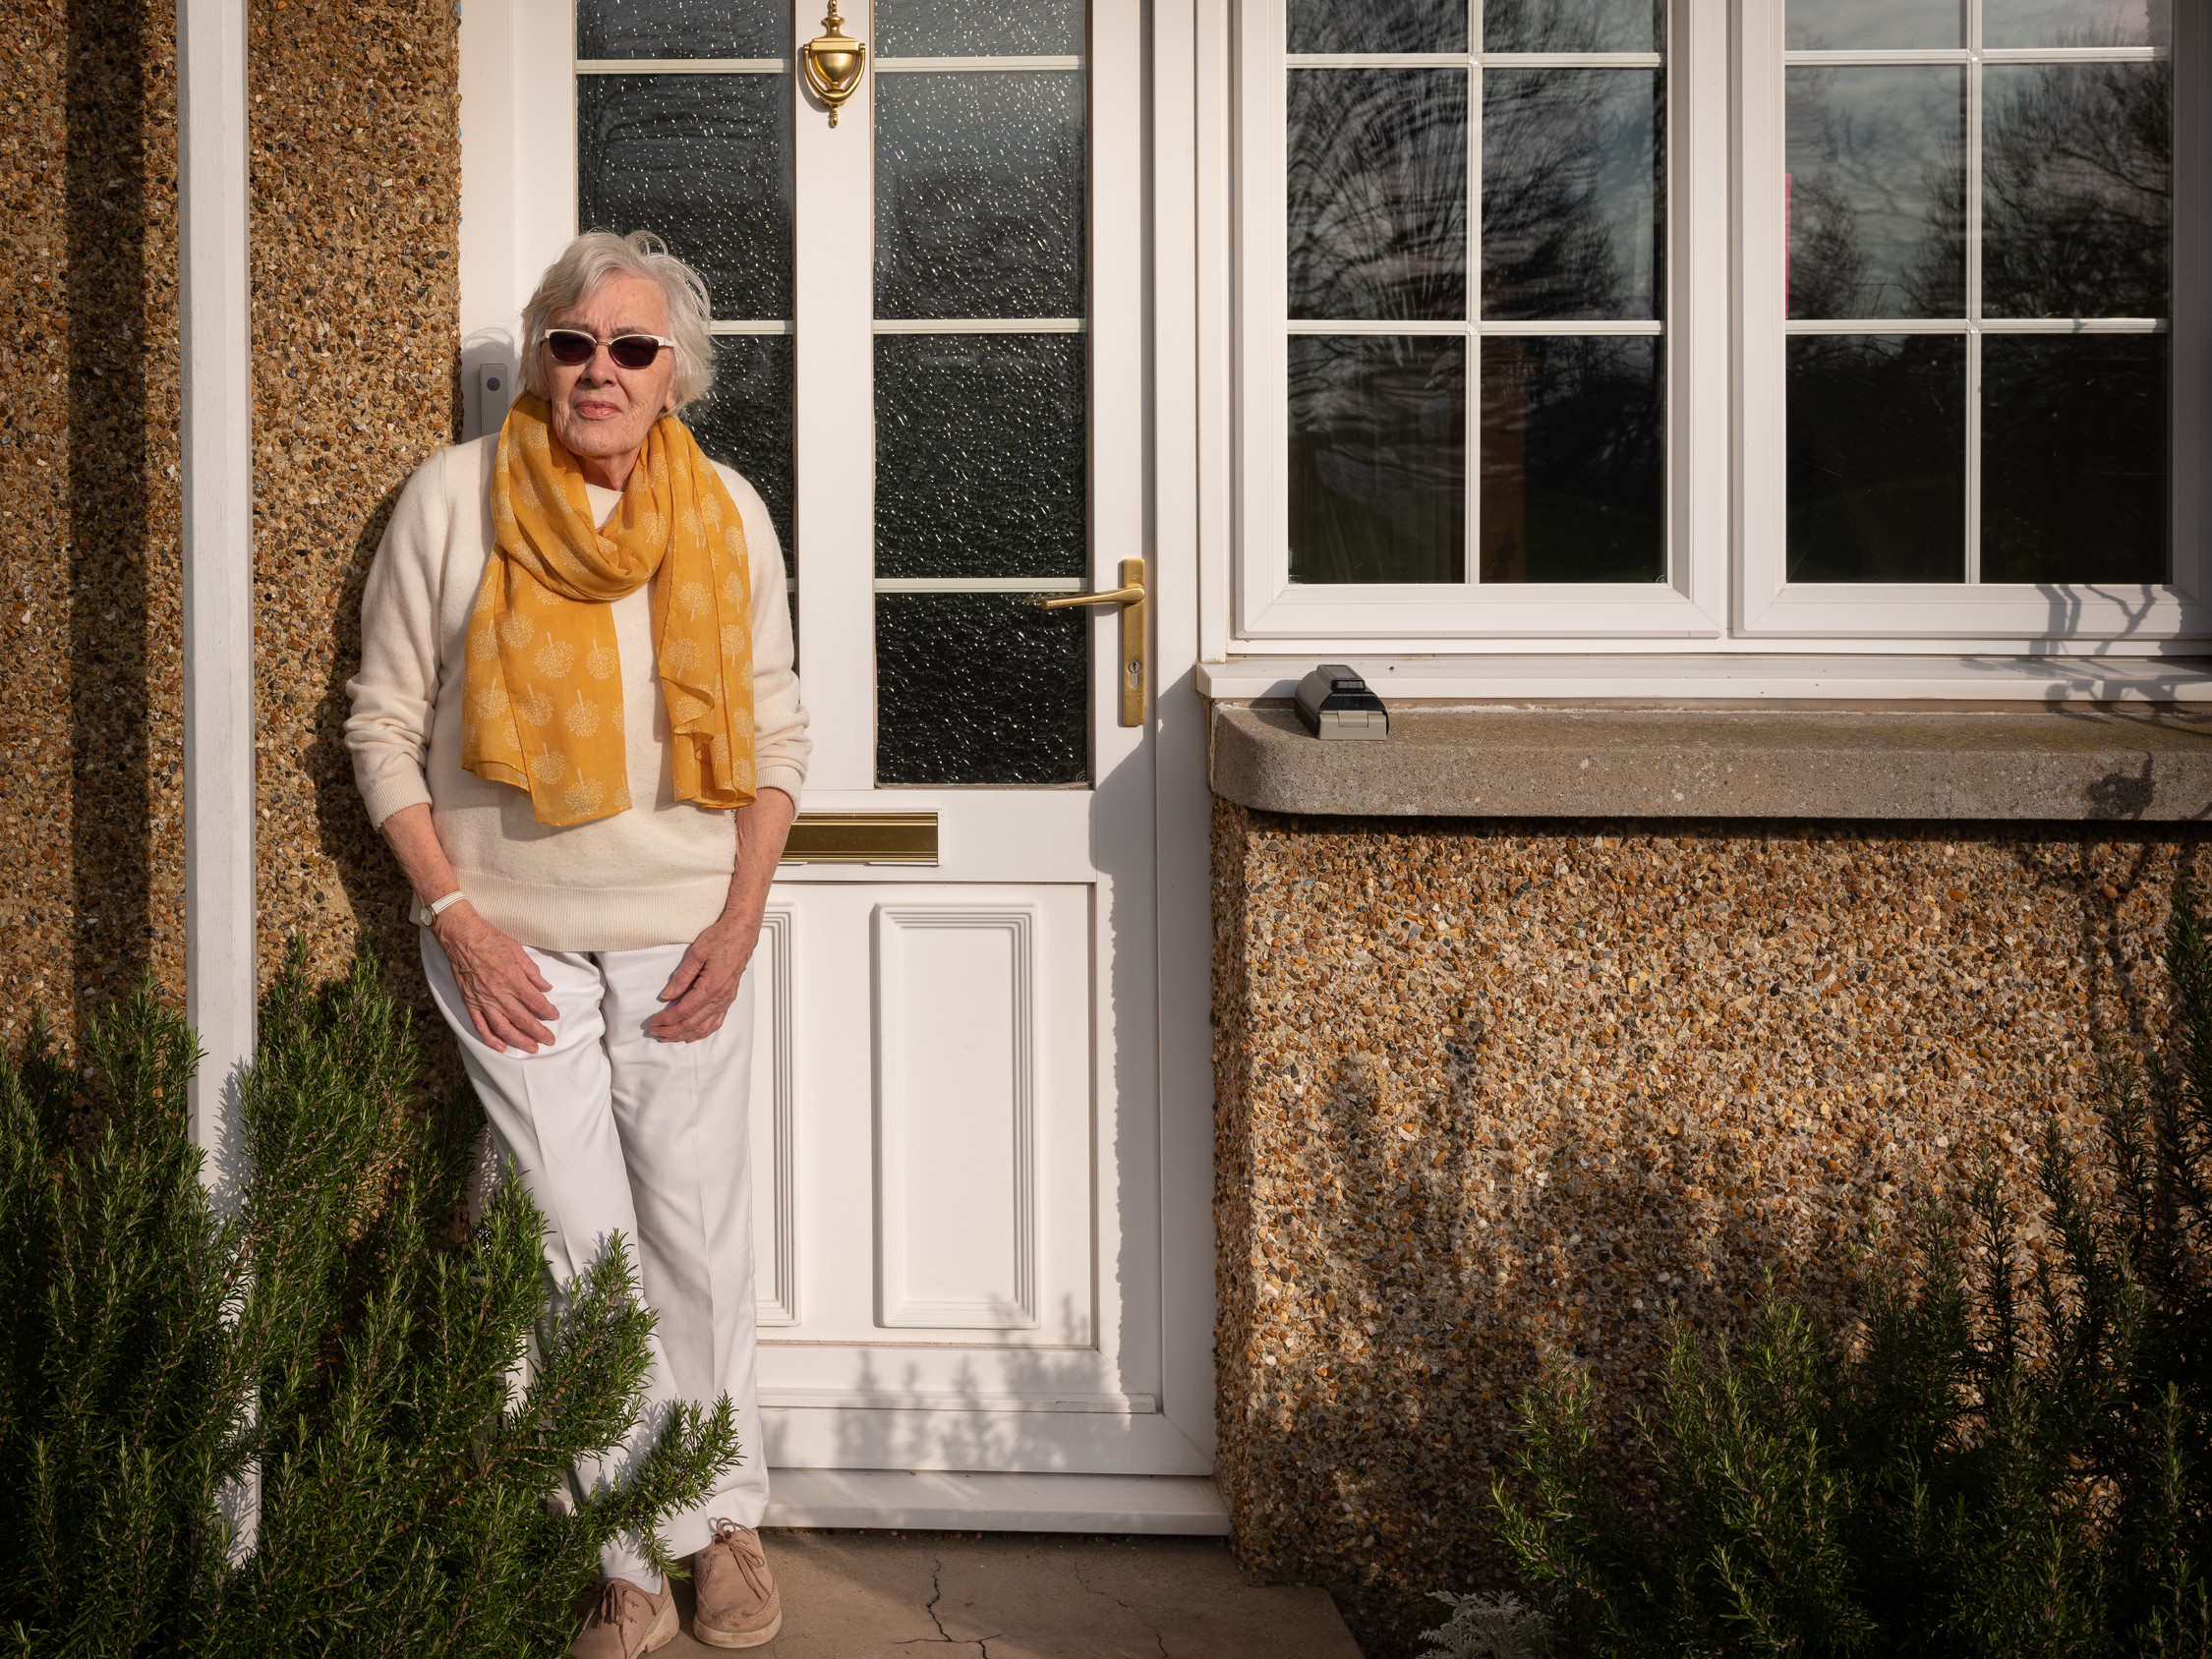 Older people: making our case to the Older People’s Housing Taskforce